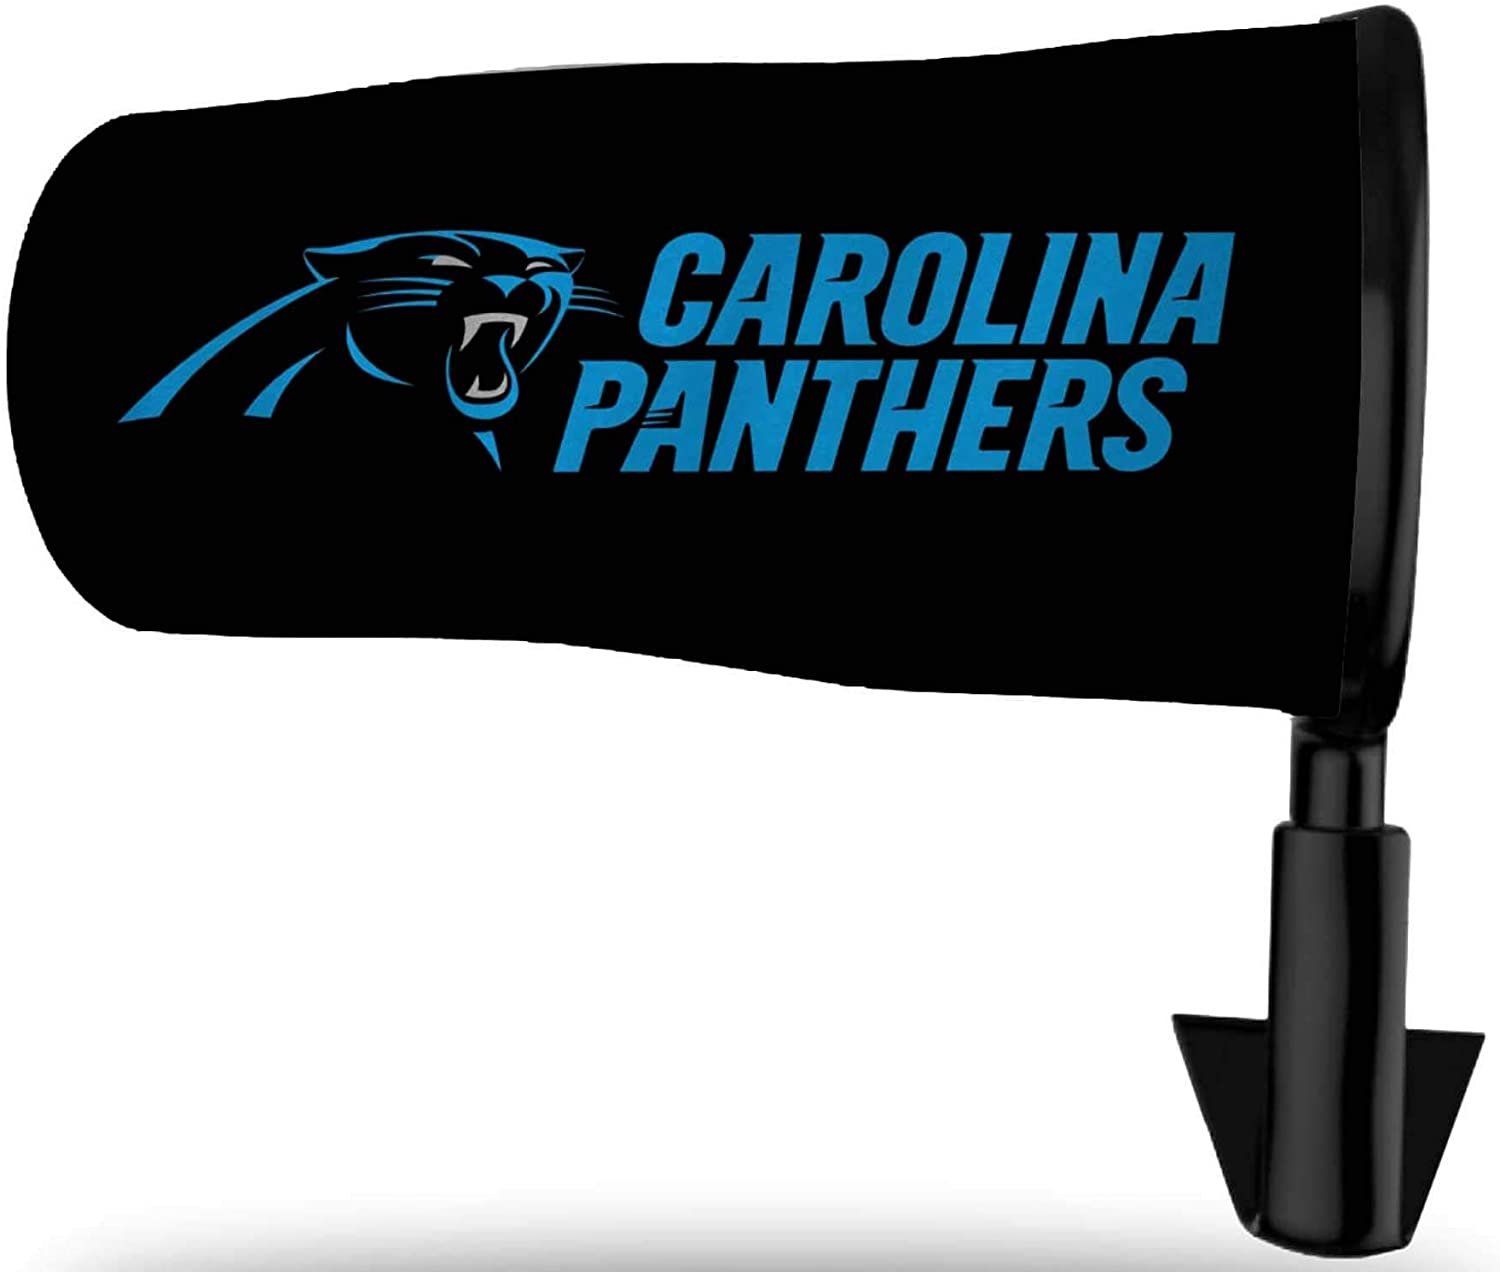 Carolina Panthers Premium Auto Windsock Car Flag Banner with Pole Included, Wind Sock Football